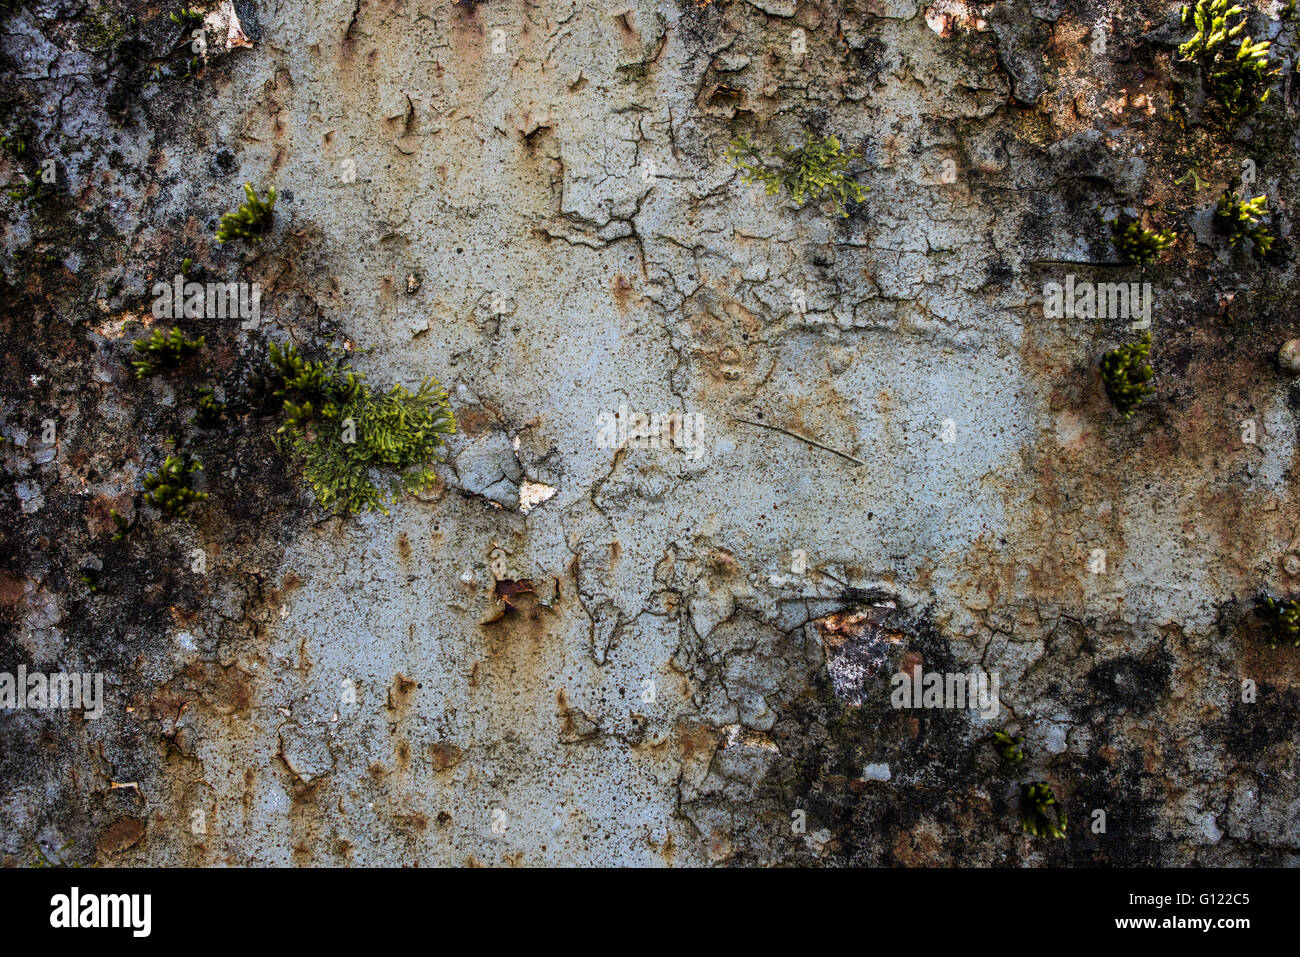 Moss growing on cracked and peeling paint - Clearwell caves Stock Photo